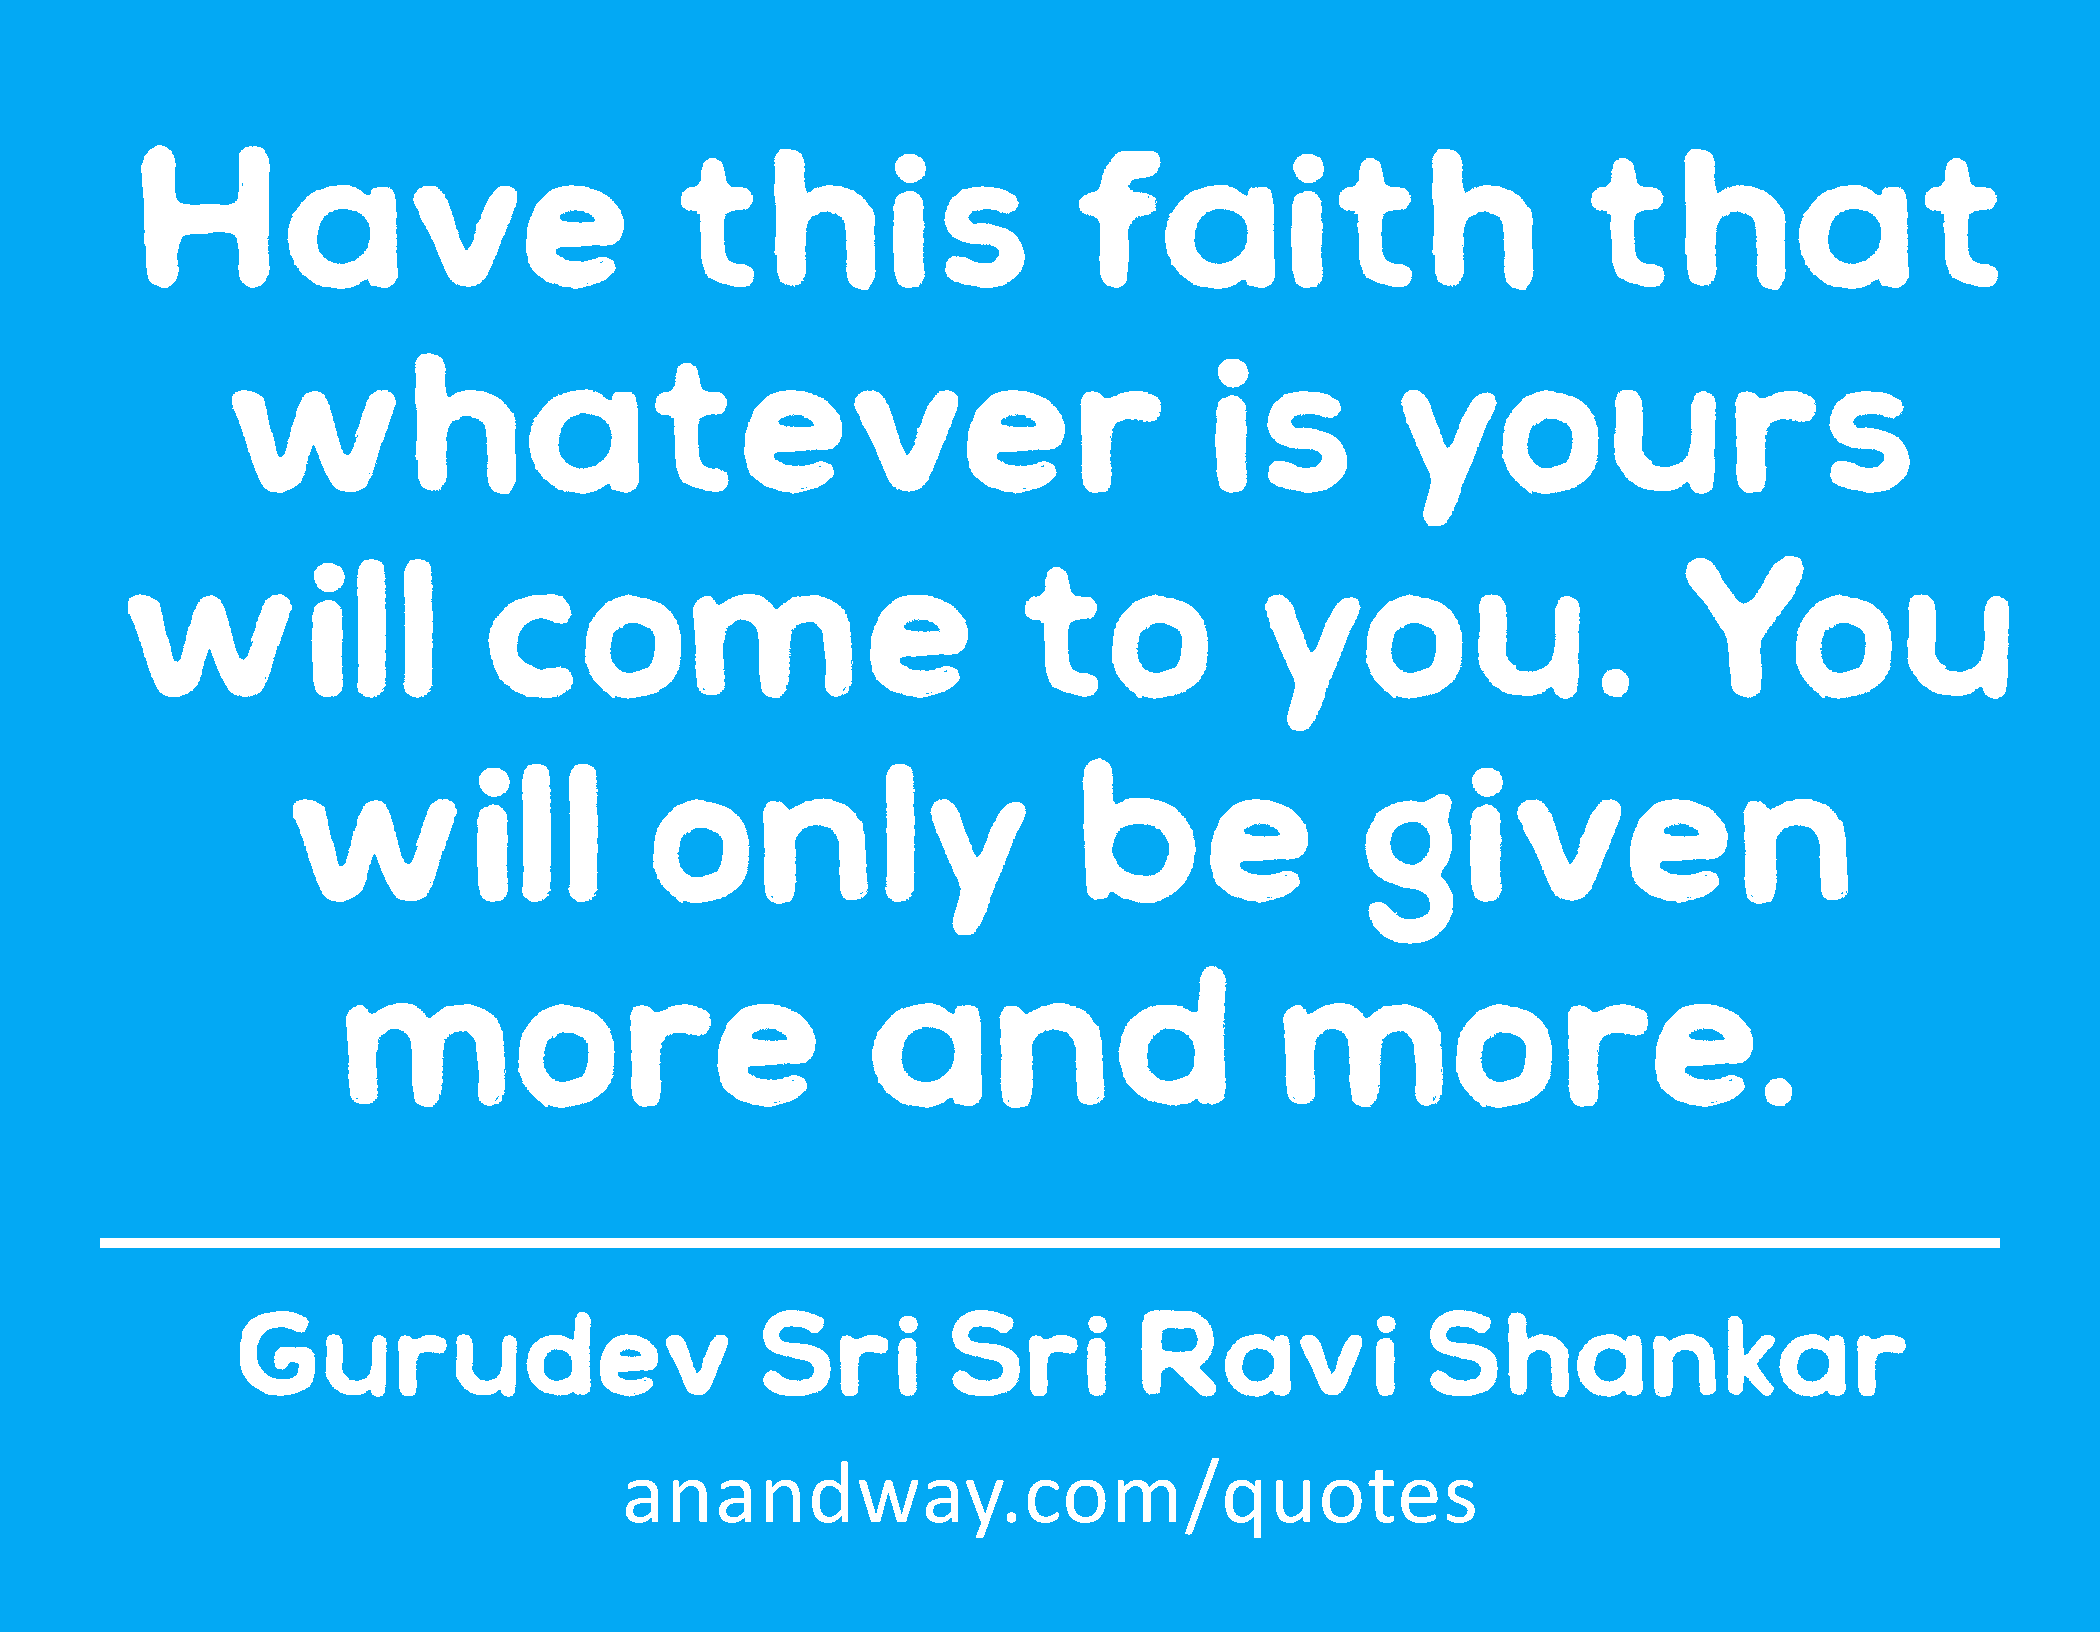 Have this faith that whatever is yours will come to you. You will only be given more and more. 
 -Gurudev Sri Sri Ravi Shankar